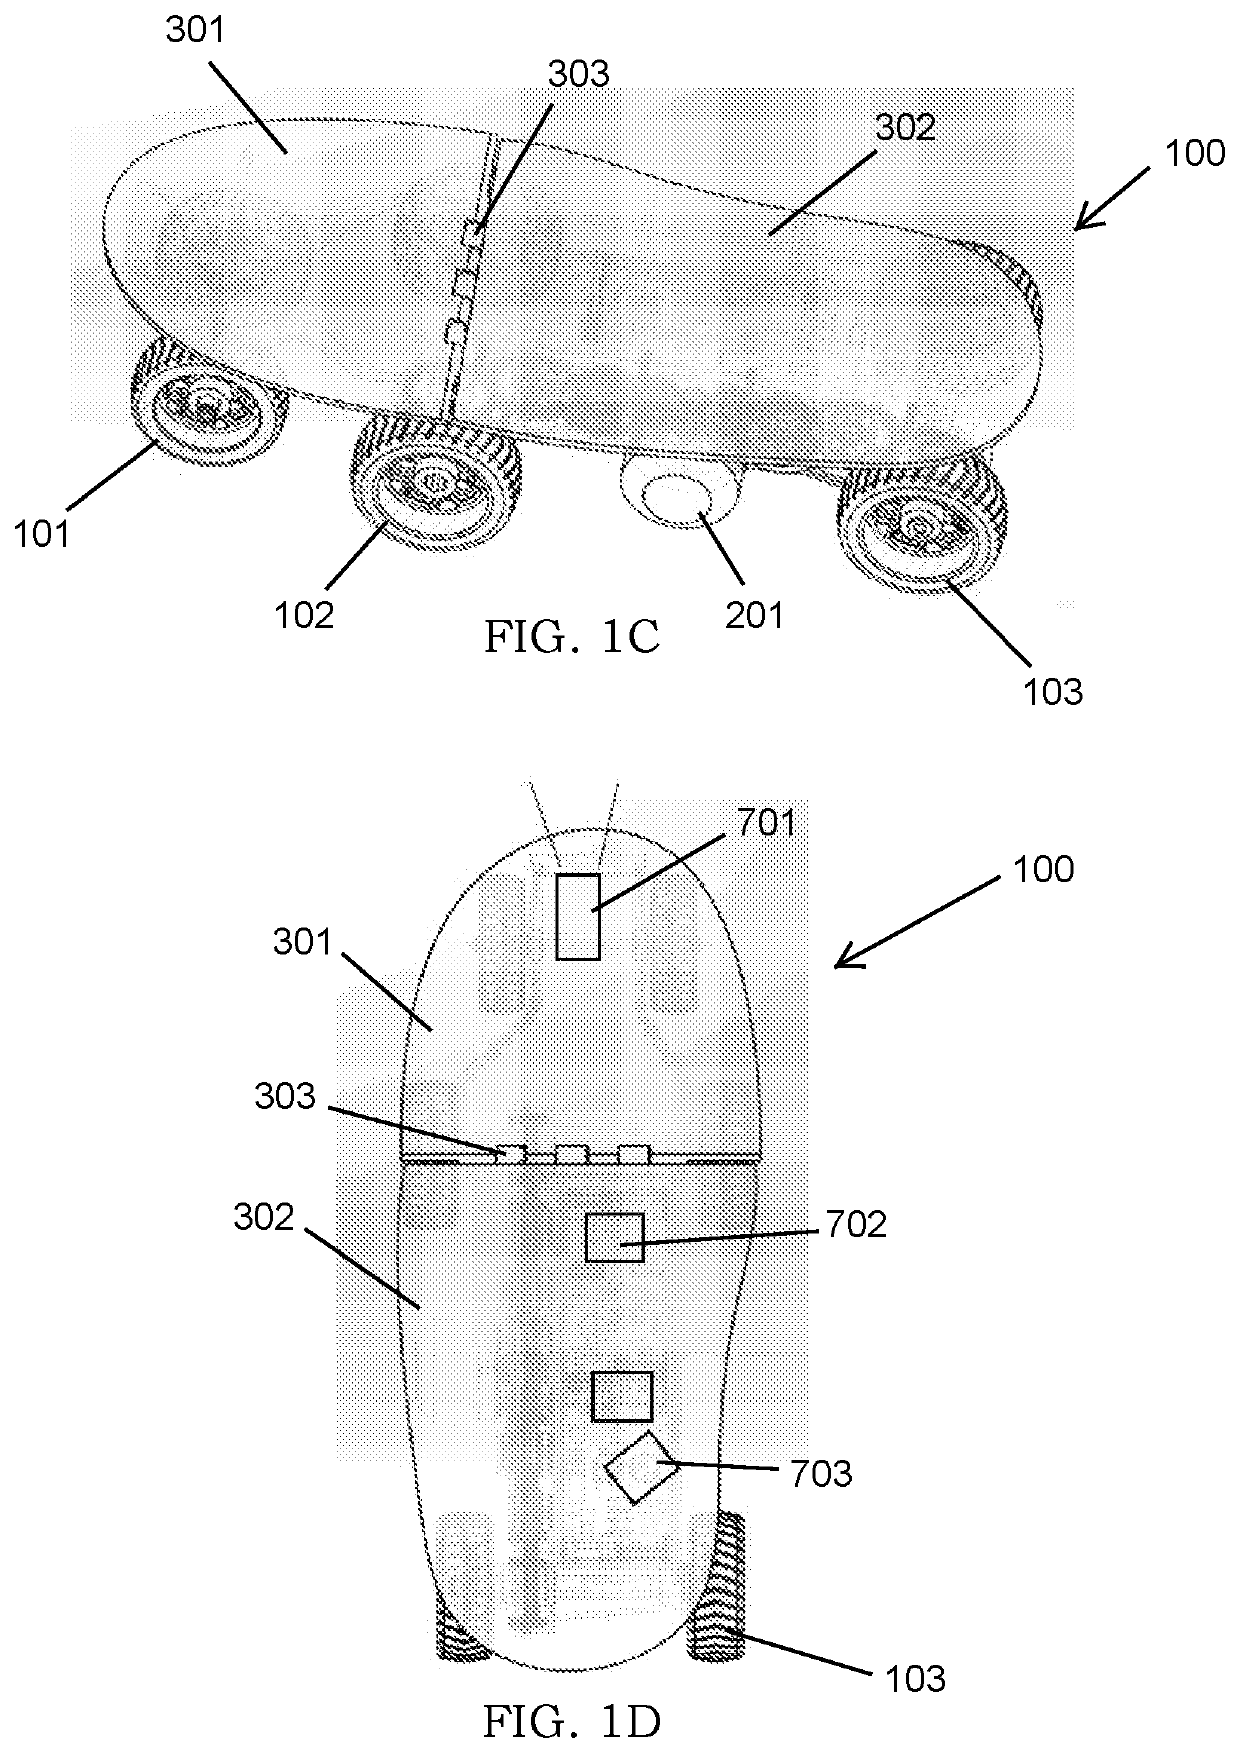 A gait controlled mobility device